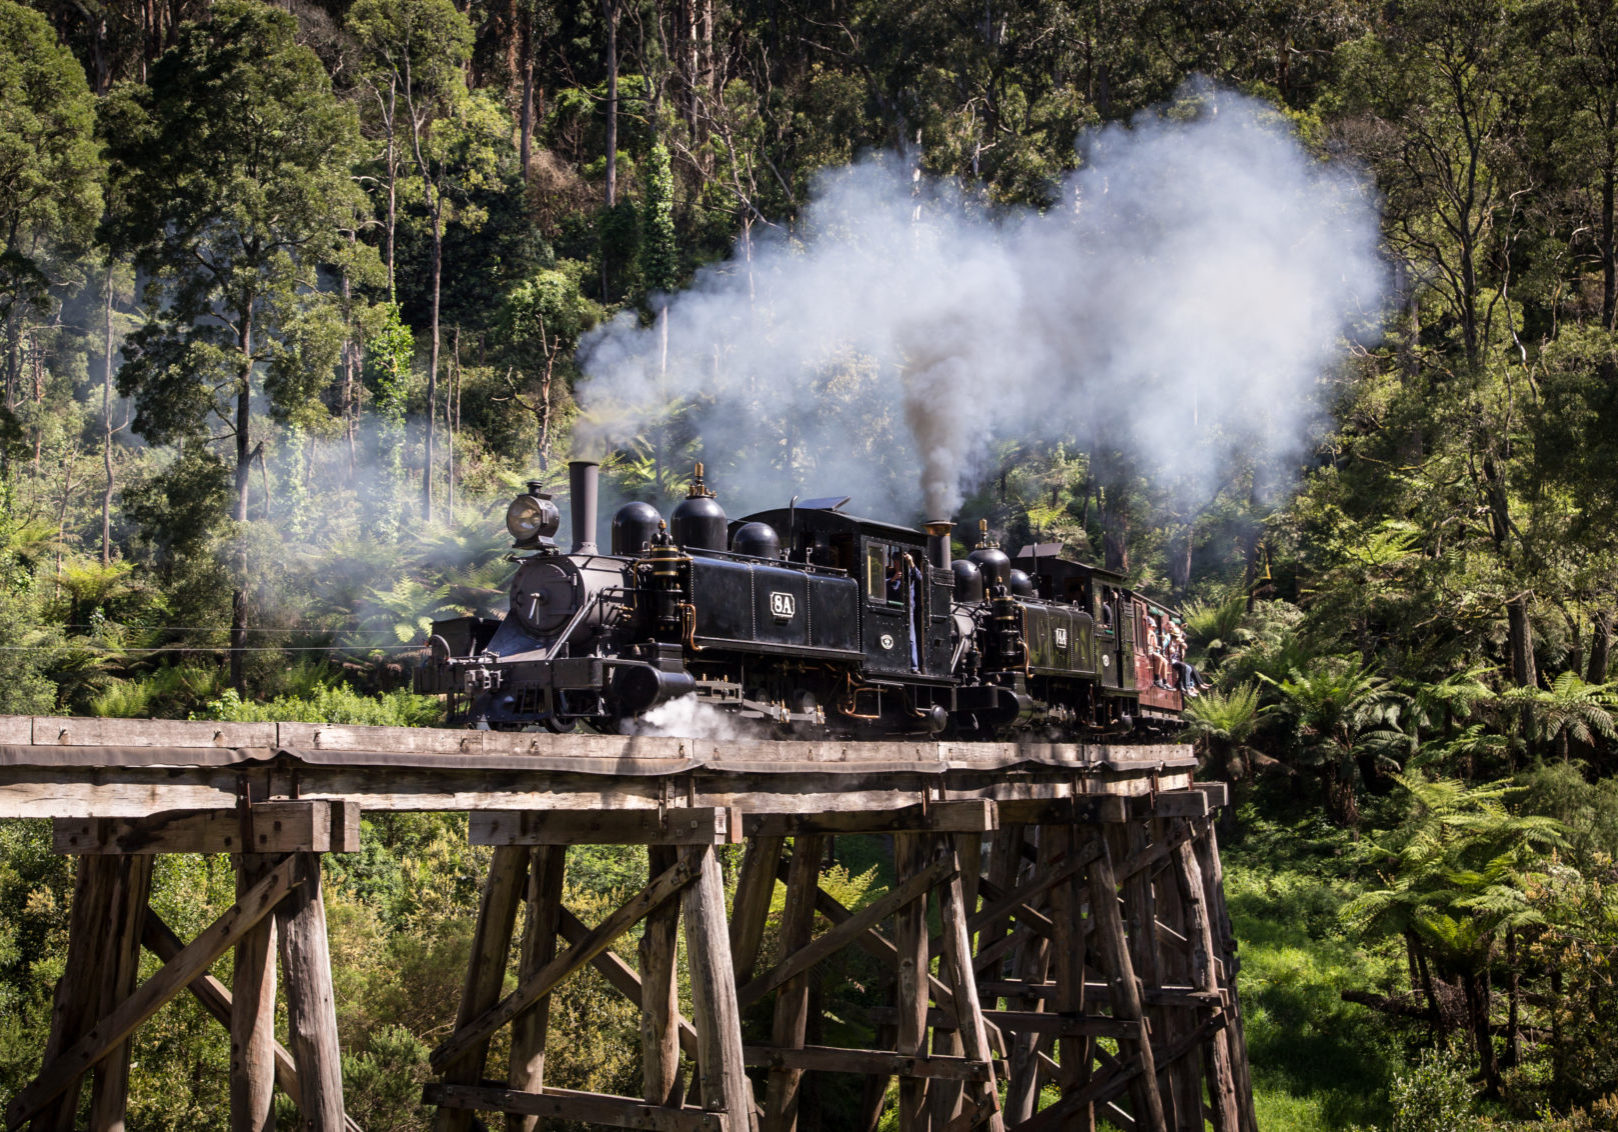 Puffing Billy travels over the Trestle Bridge